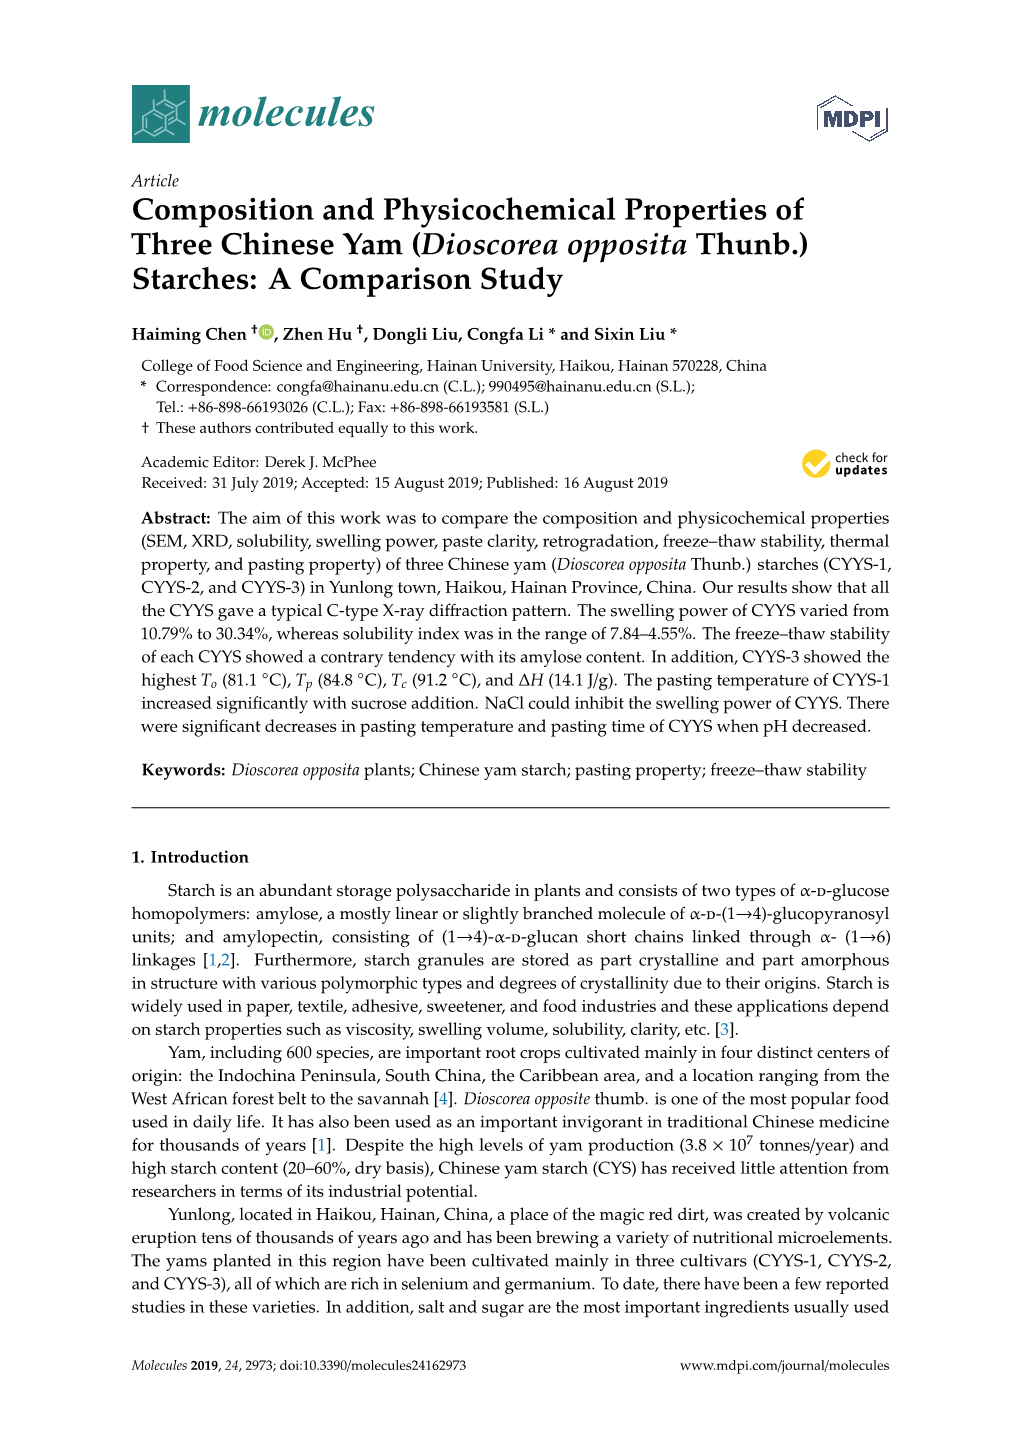 Composition and Physicochemical Properties of Three Chinese Yam (Dioscorea Opposita Thunb.) Starches: a Comparison Study